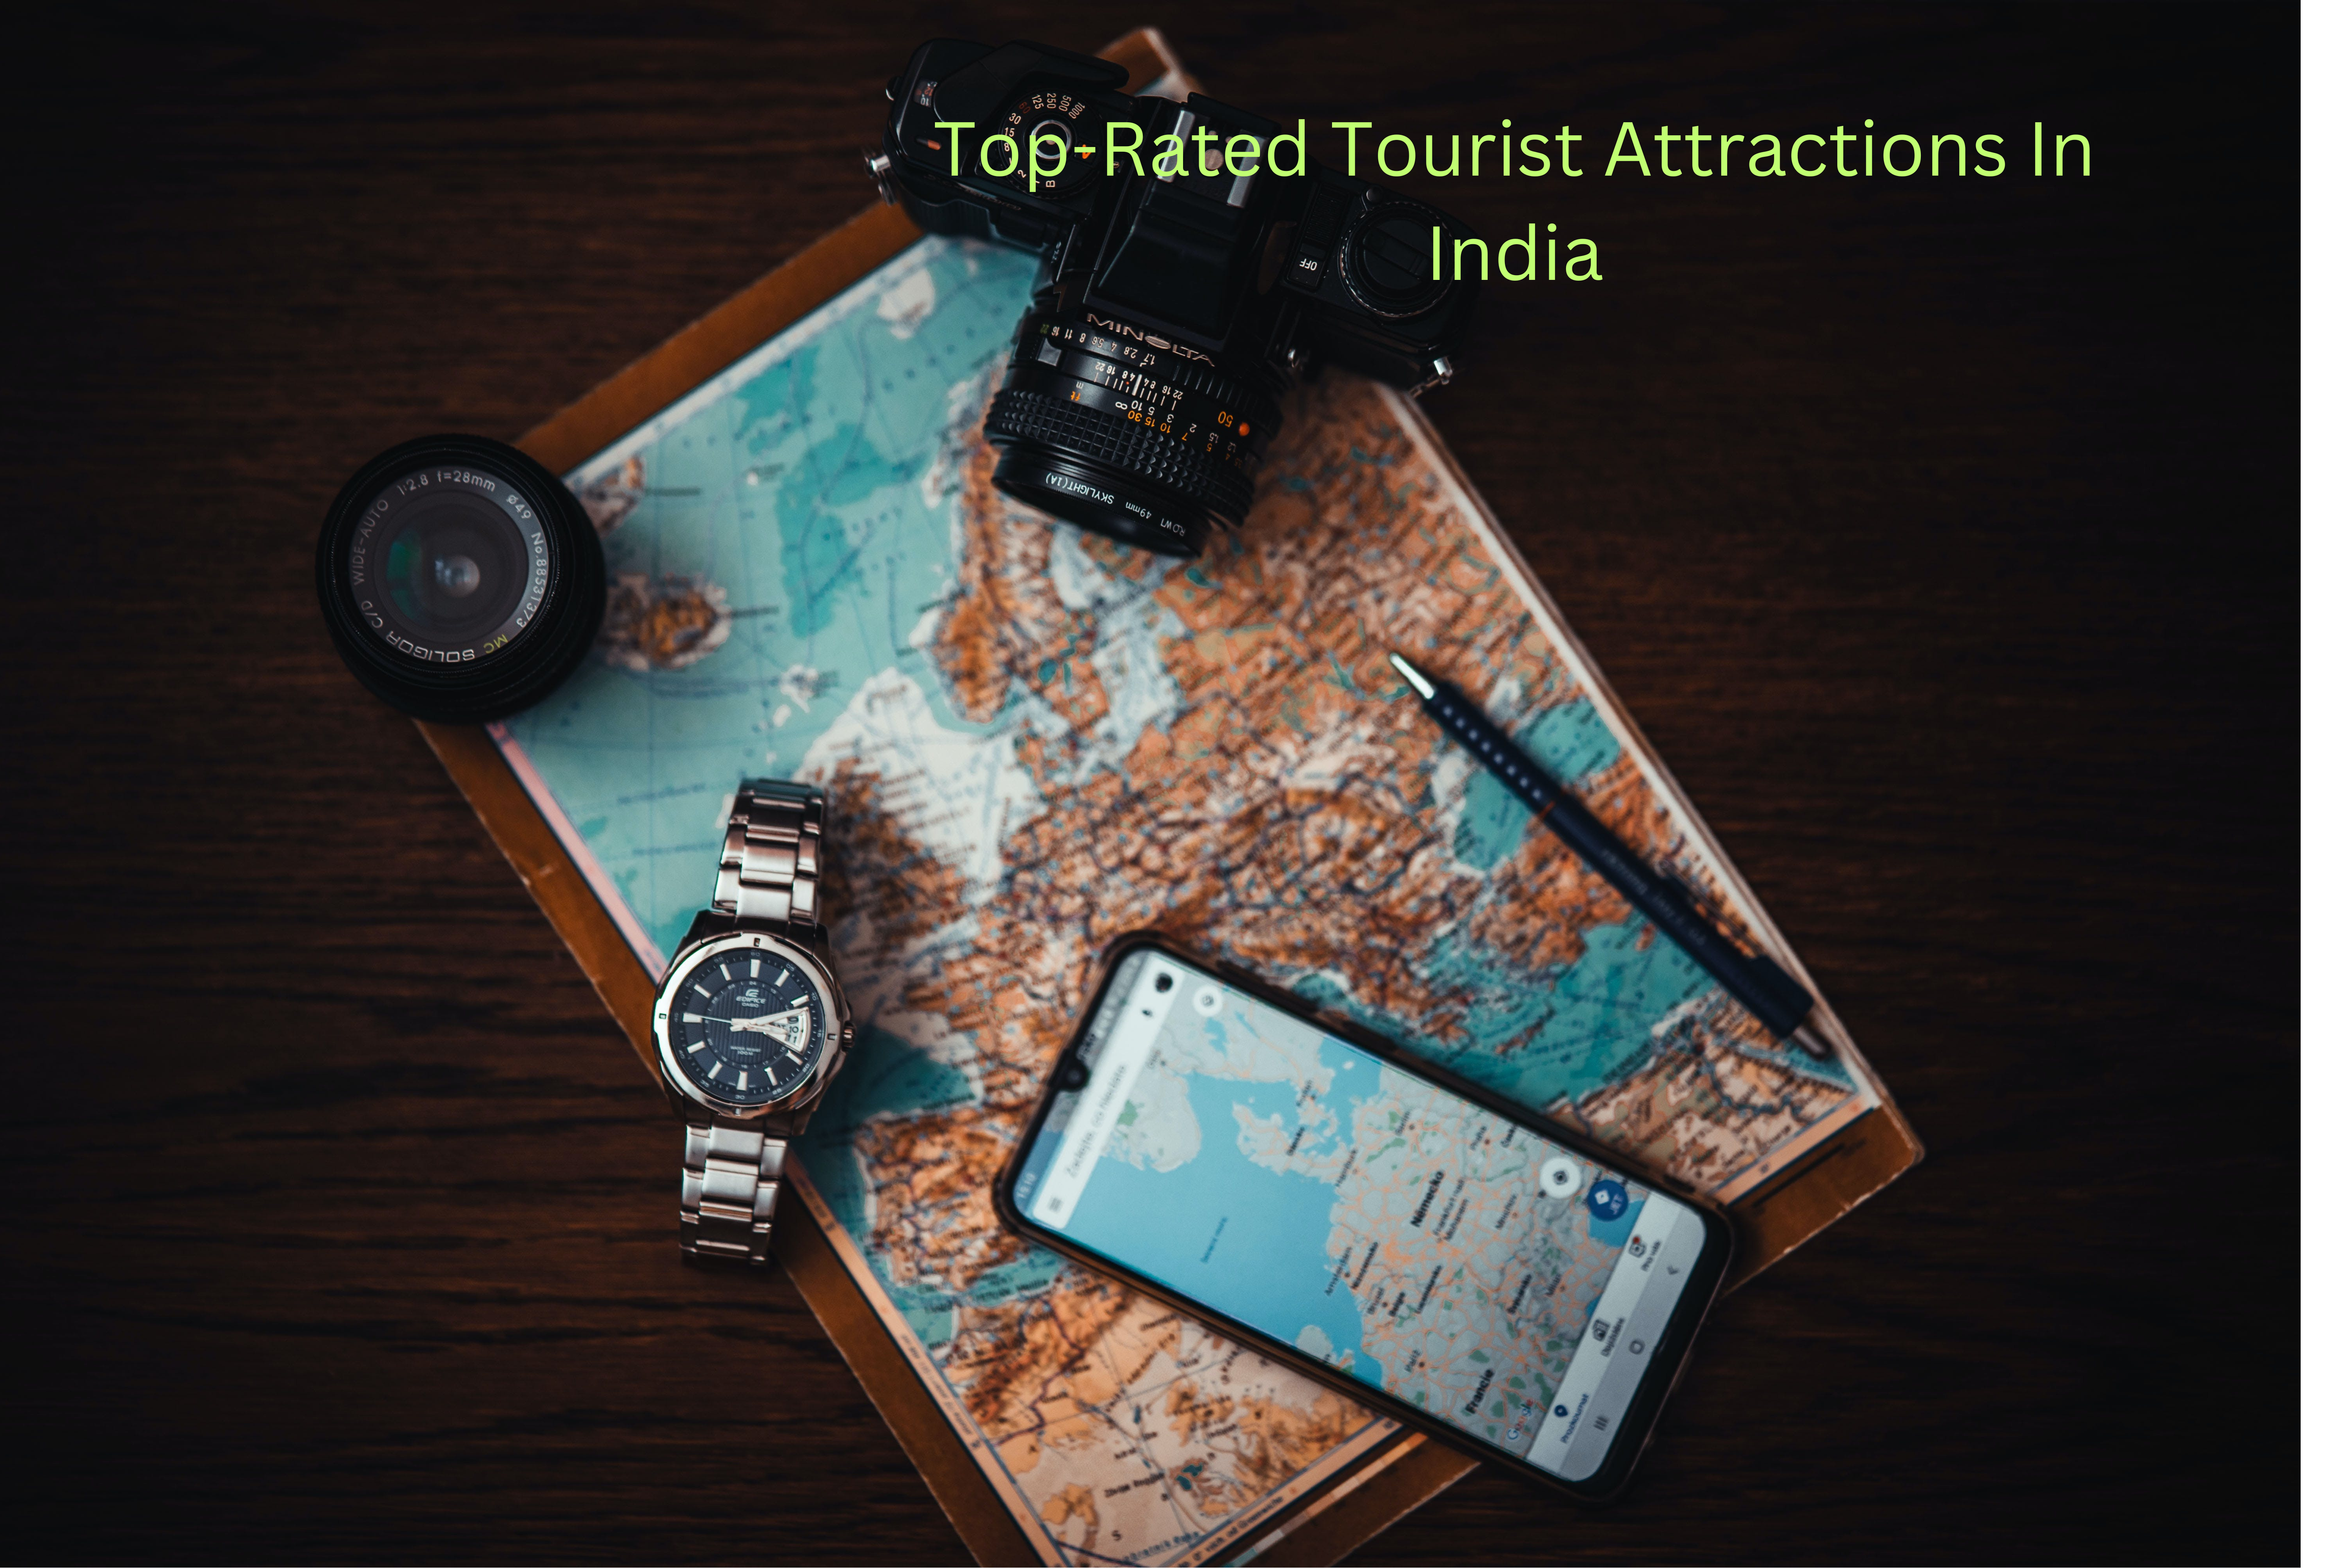 Top-Rated Tourist Attractions In India